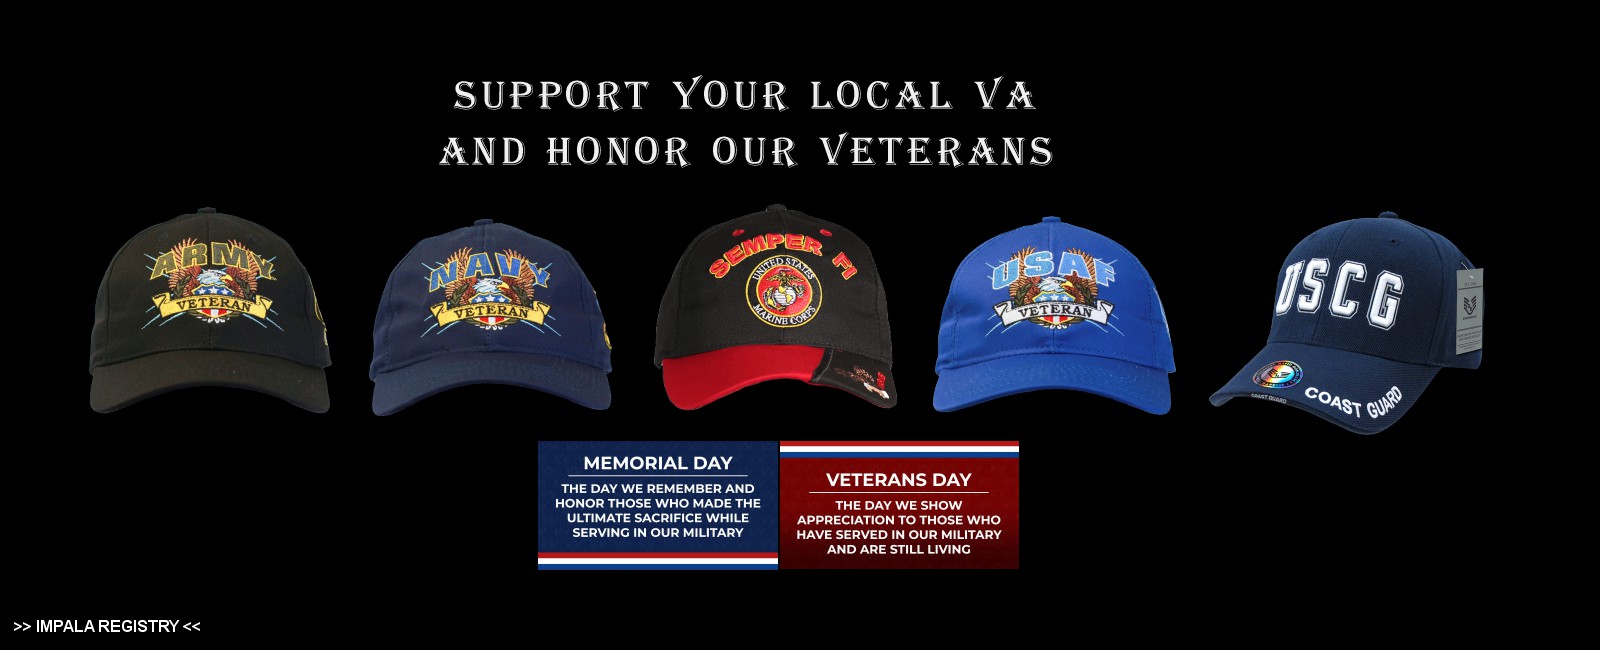 honor_our_veterans